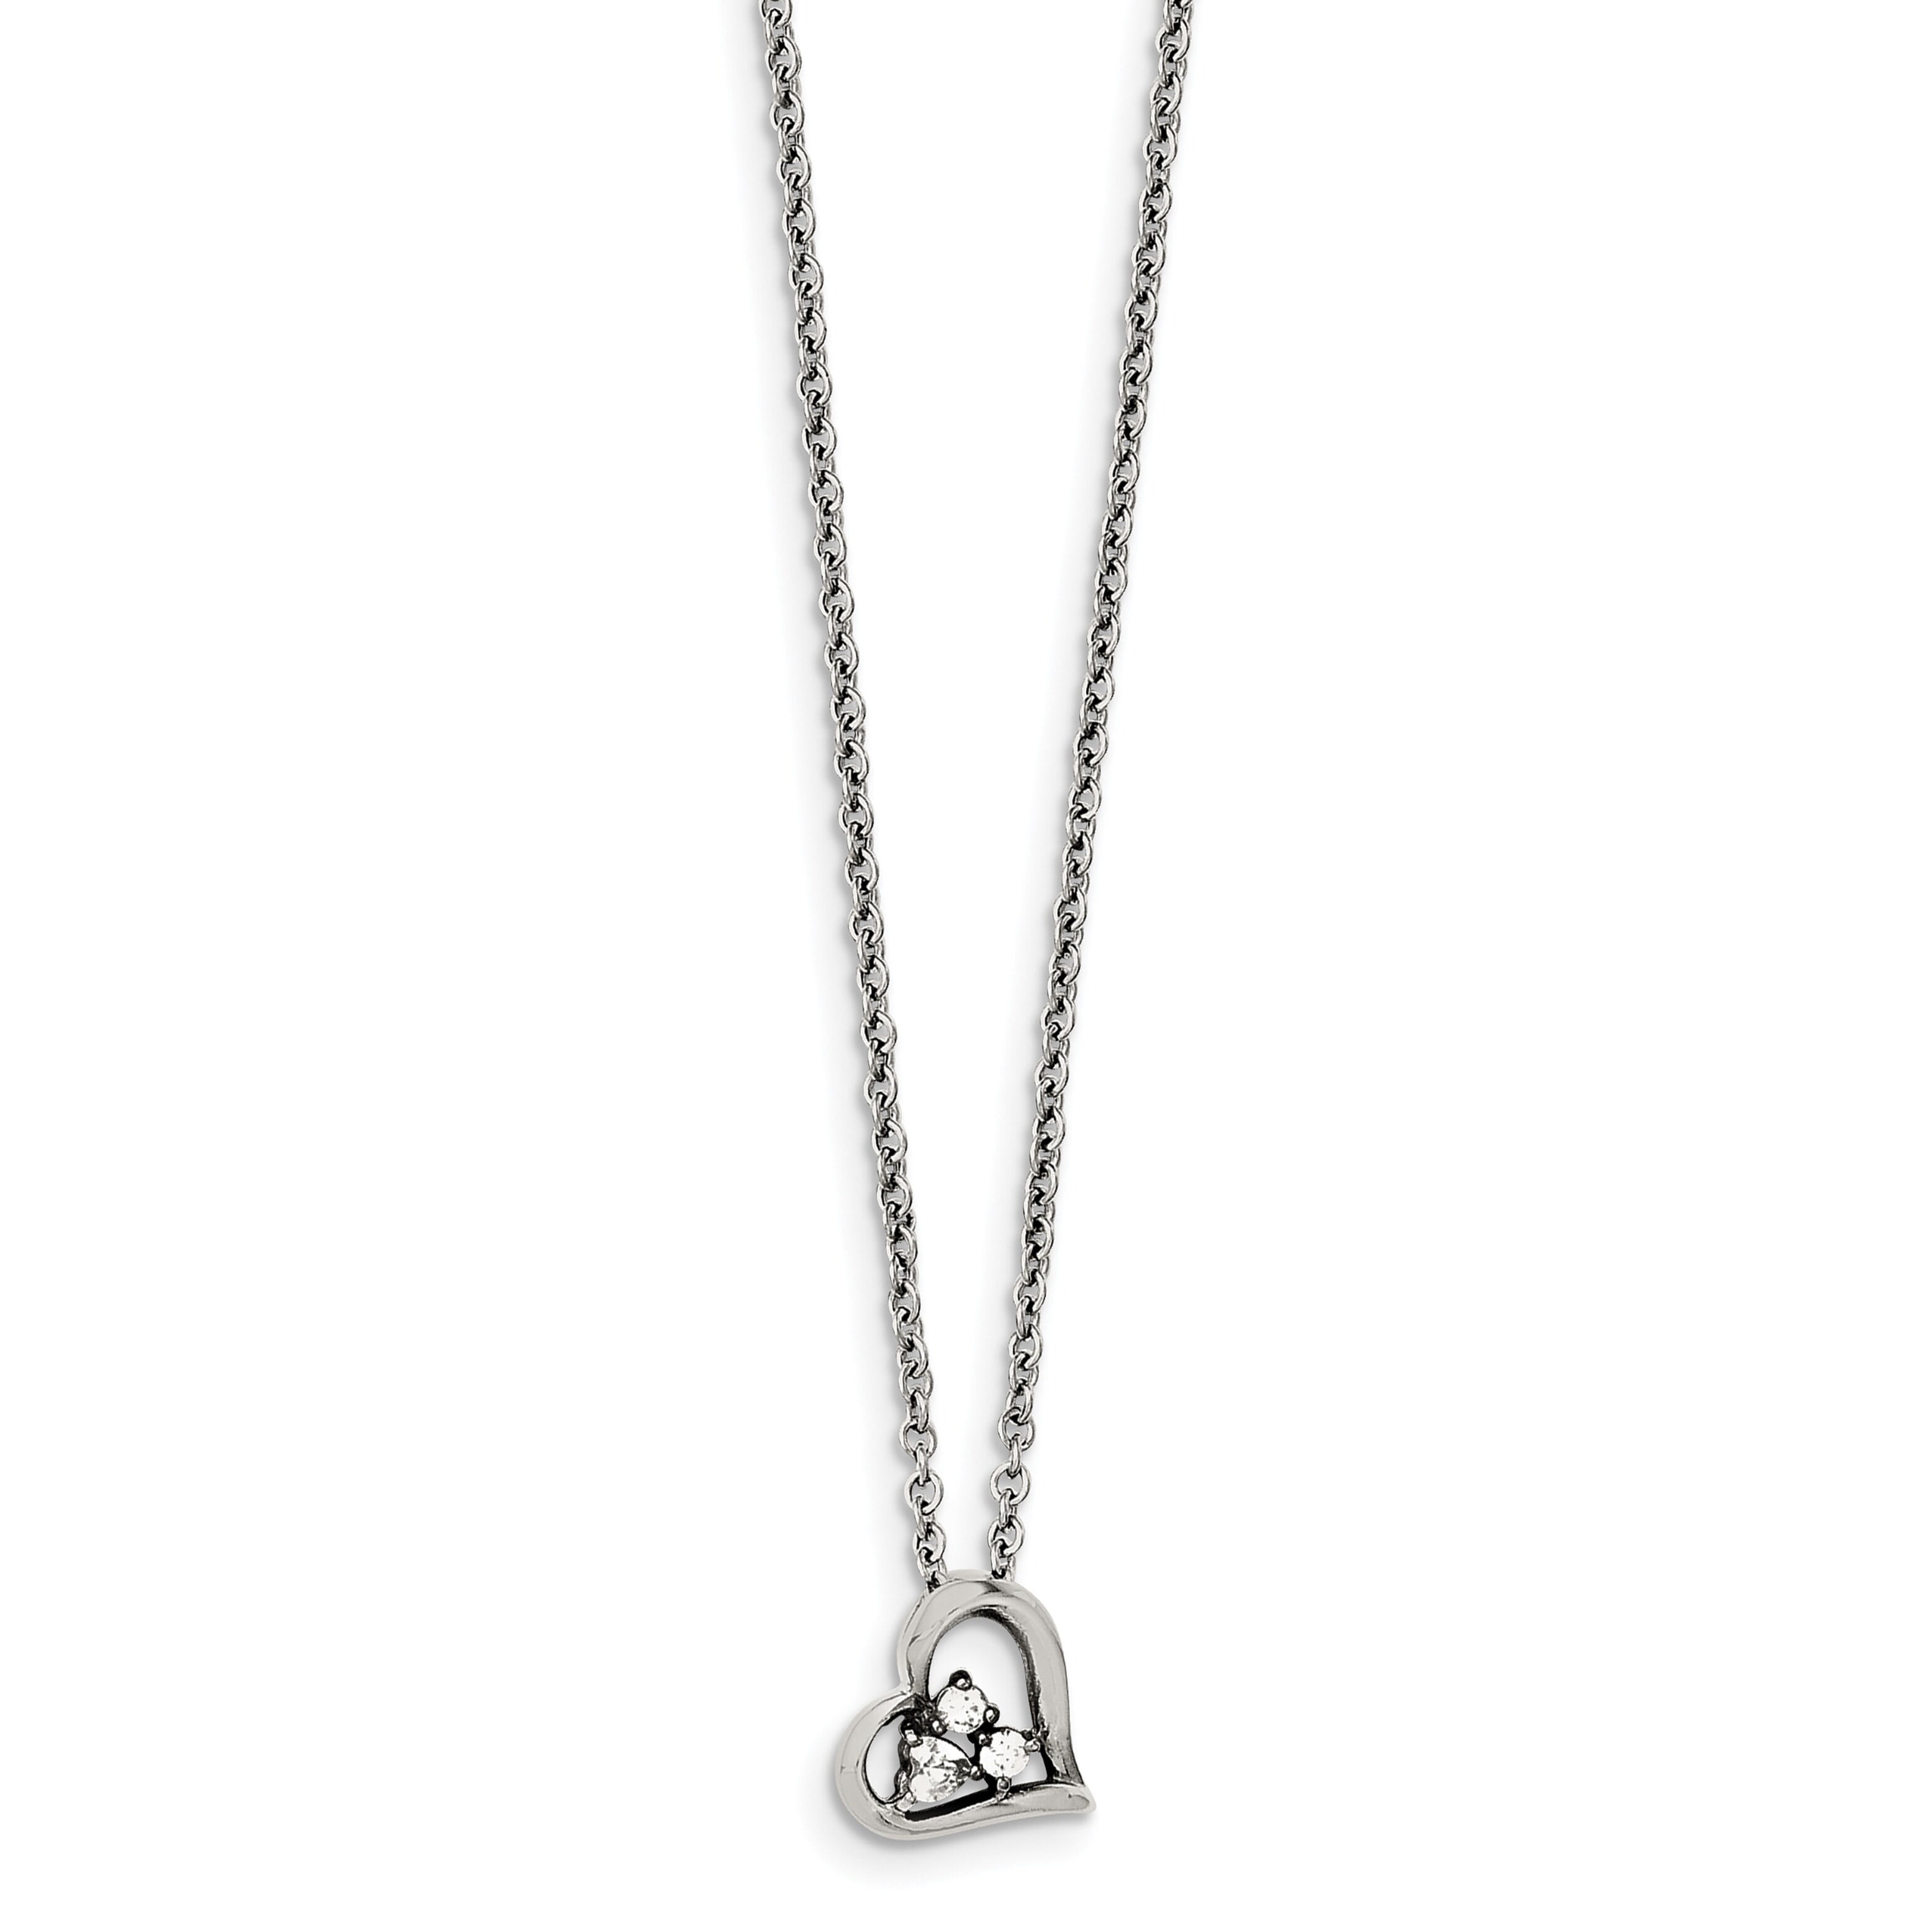 Stainless Steel Polished Love Necklace 18 Inches Long